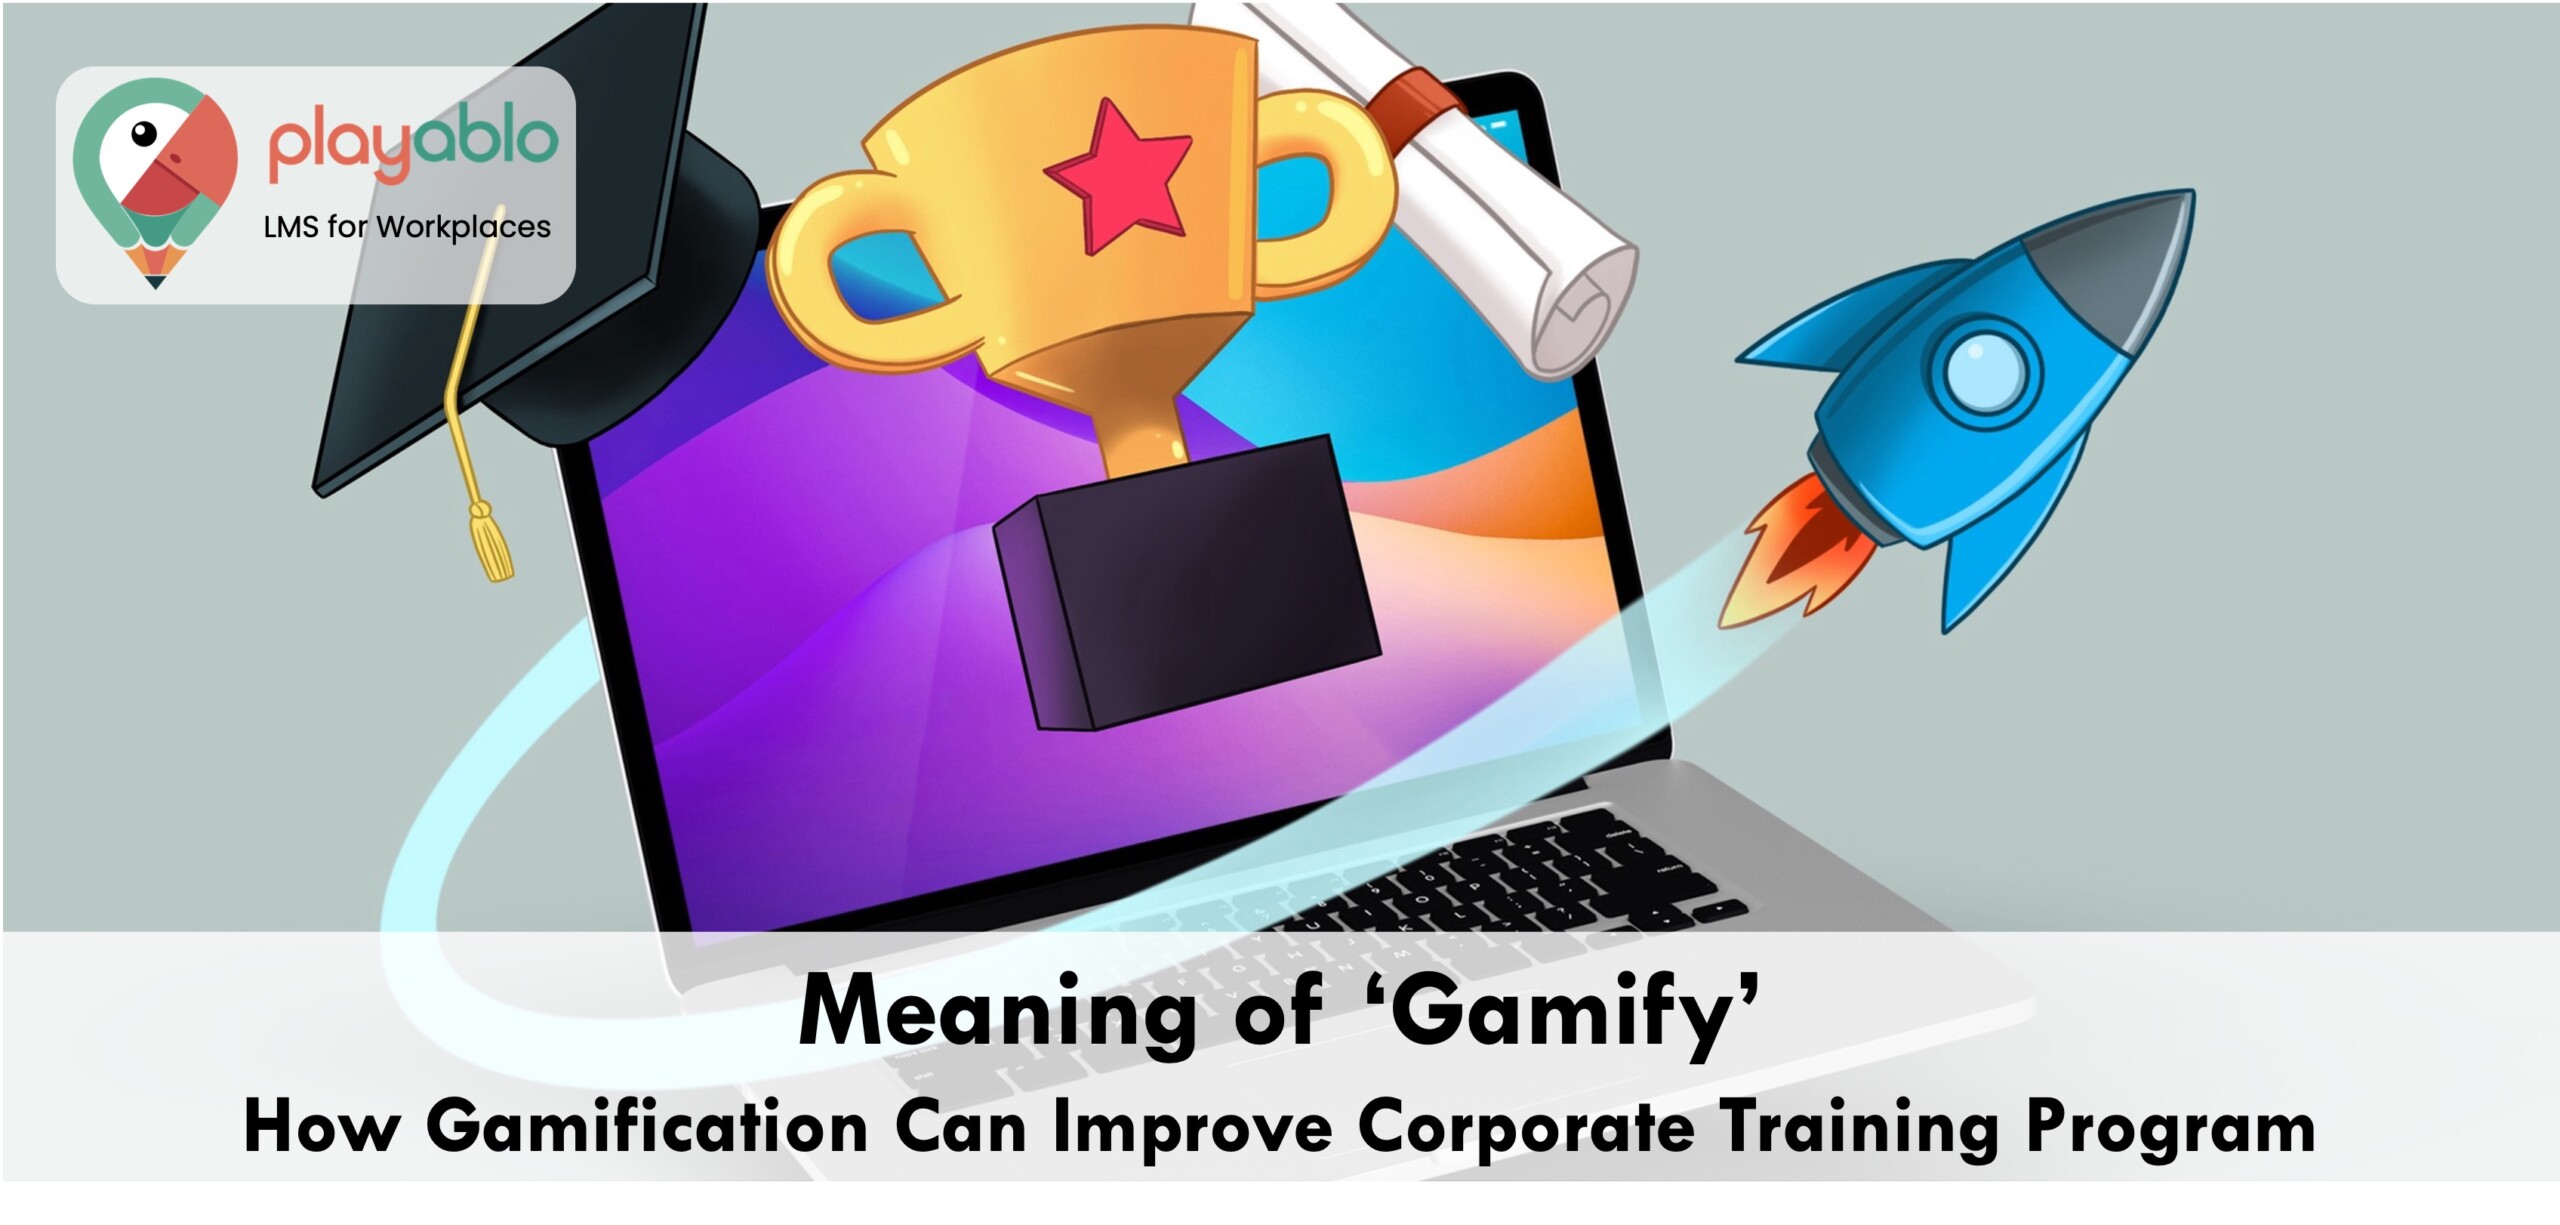 gamify-meaning